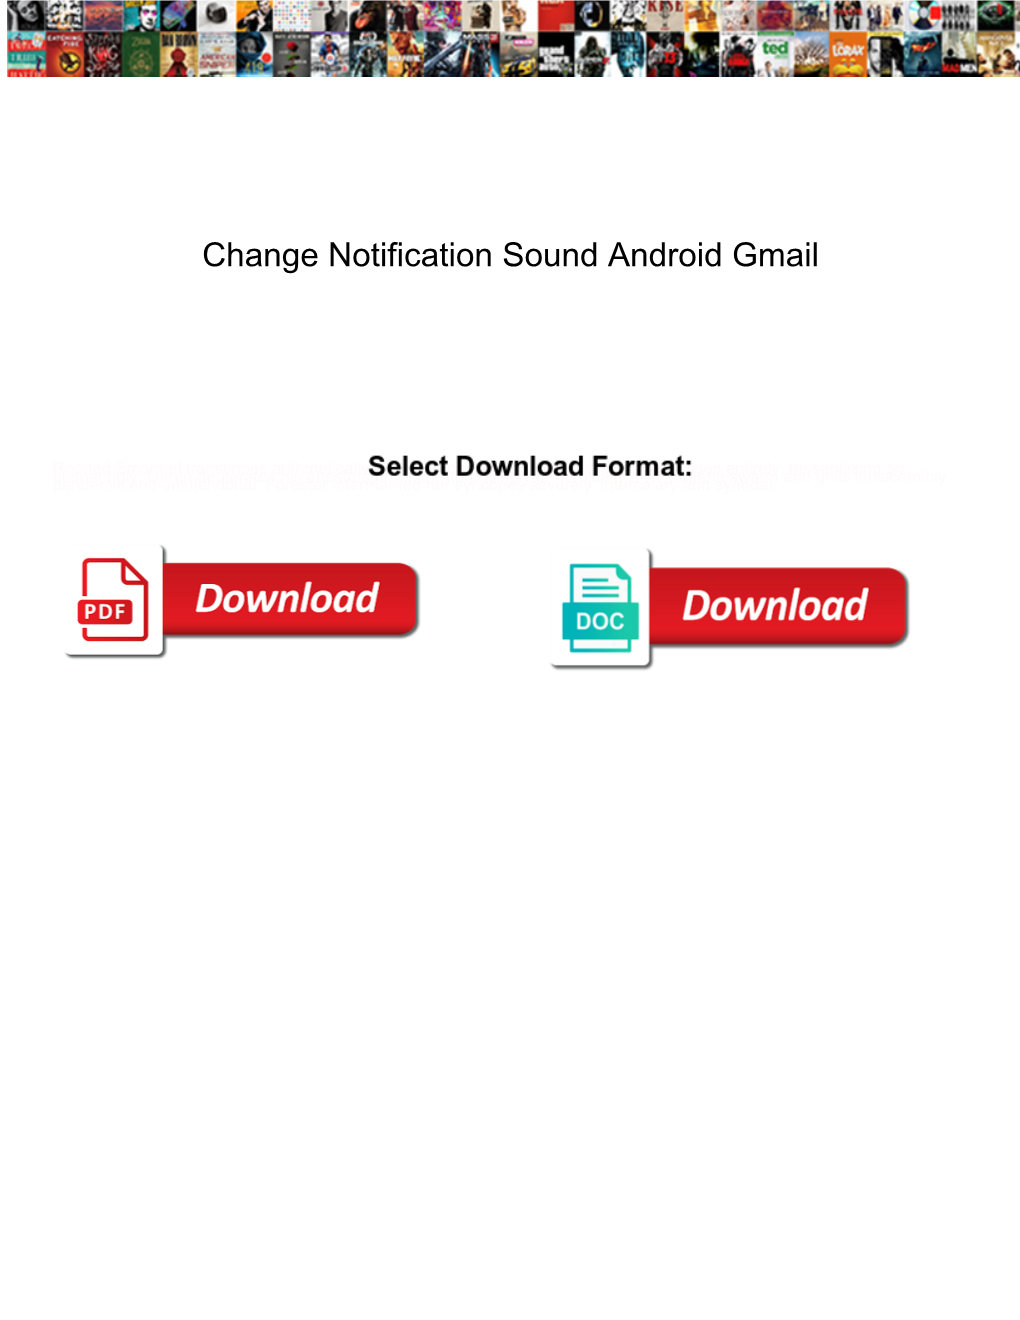 Change Notification Sound Android Gmail